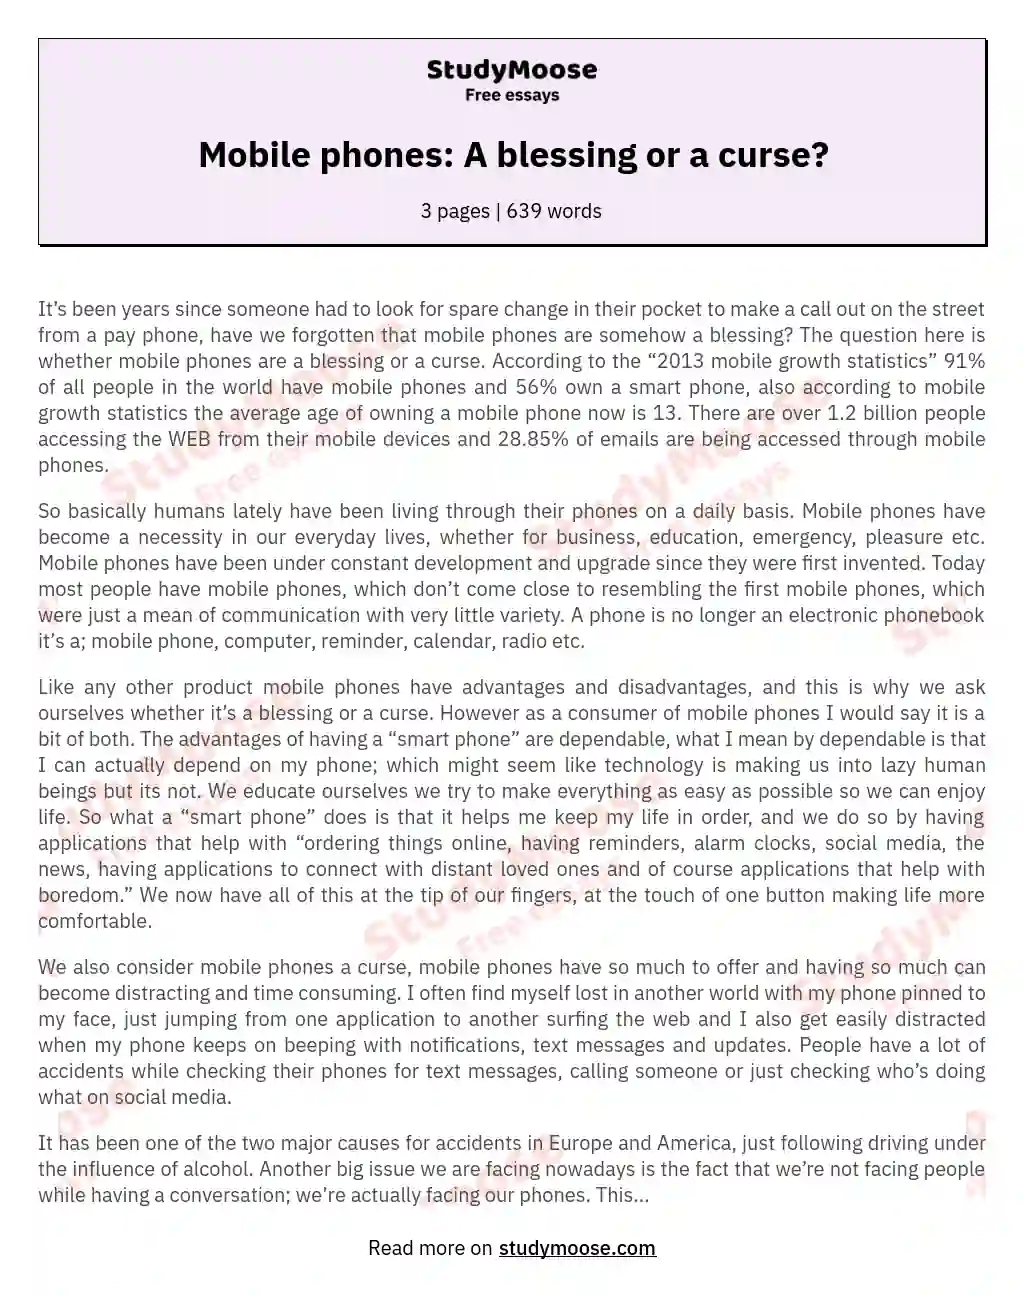 essay on mobile phone blessing or a curse